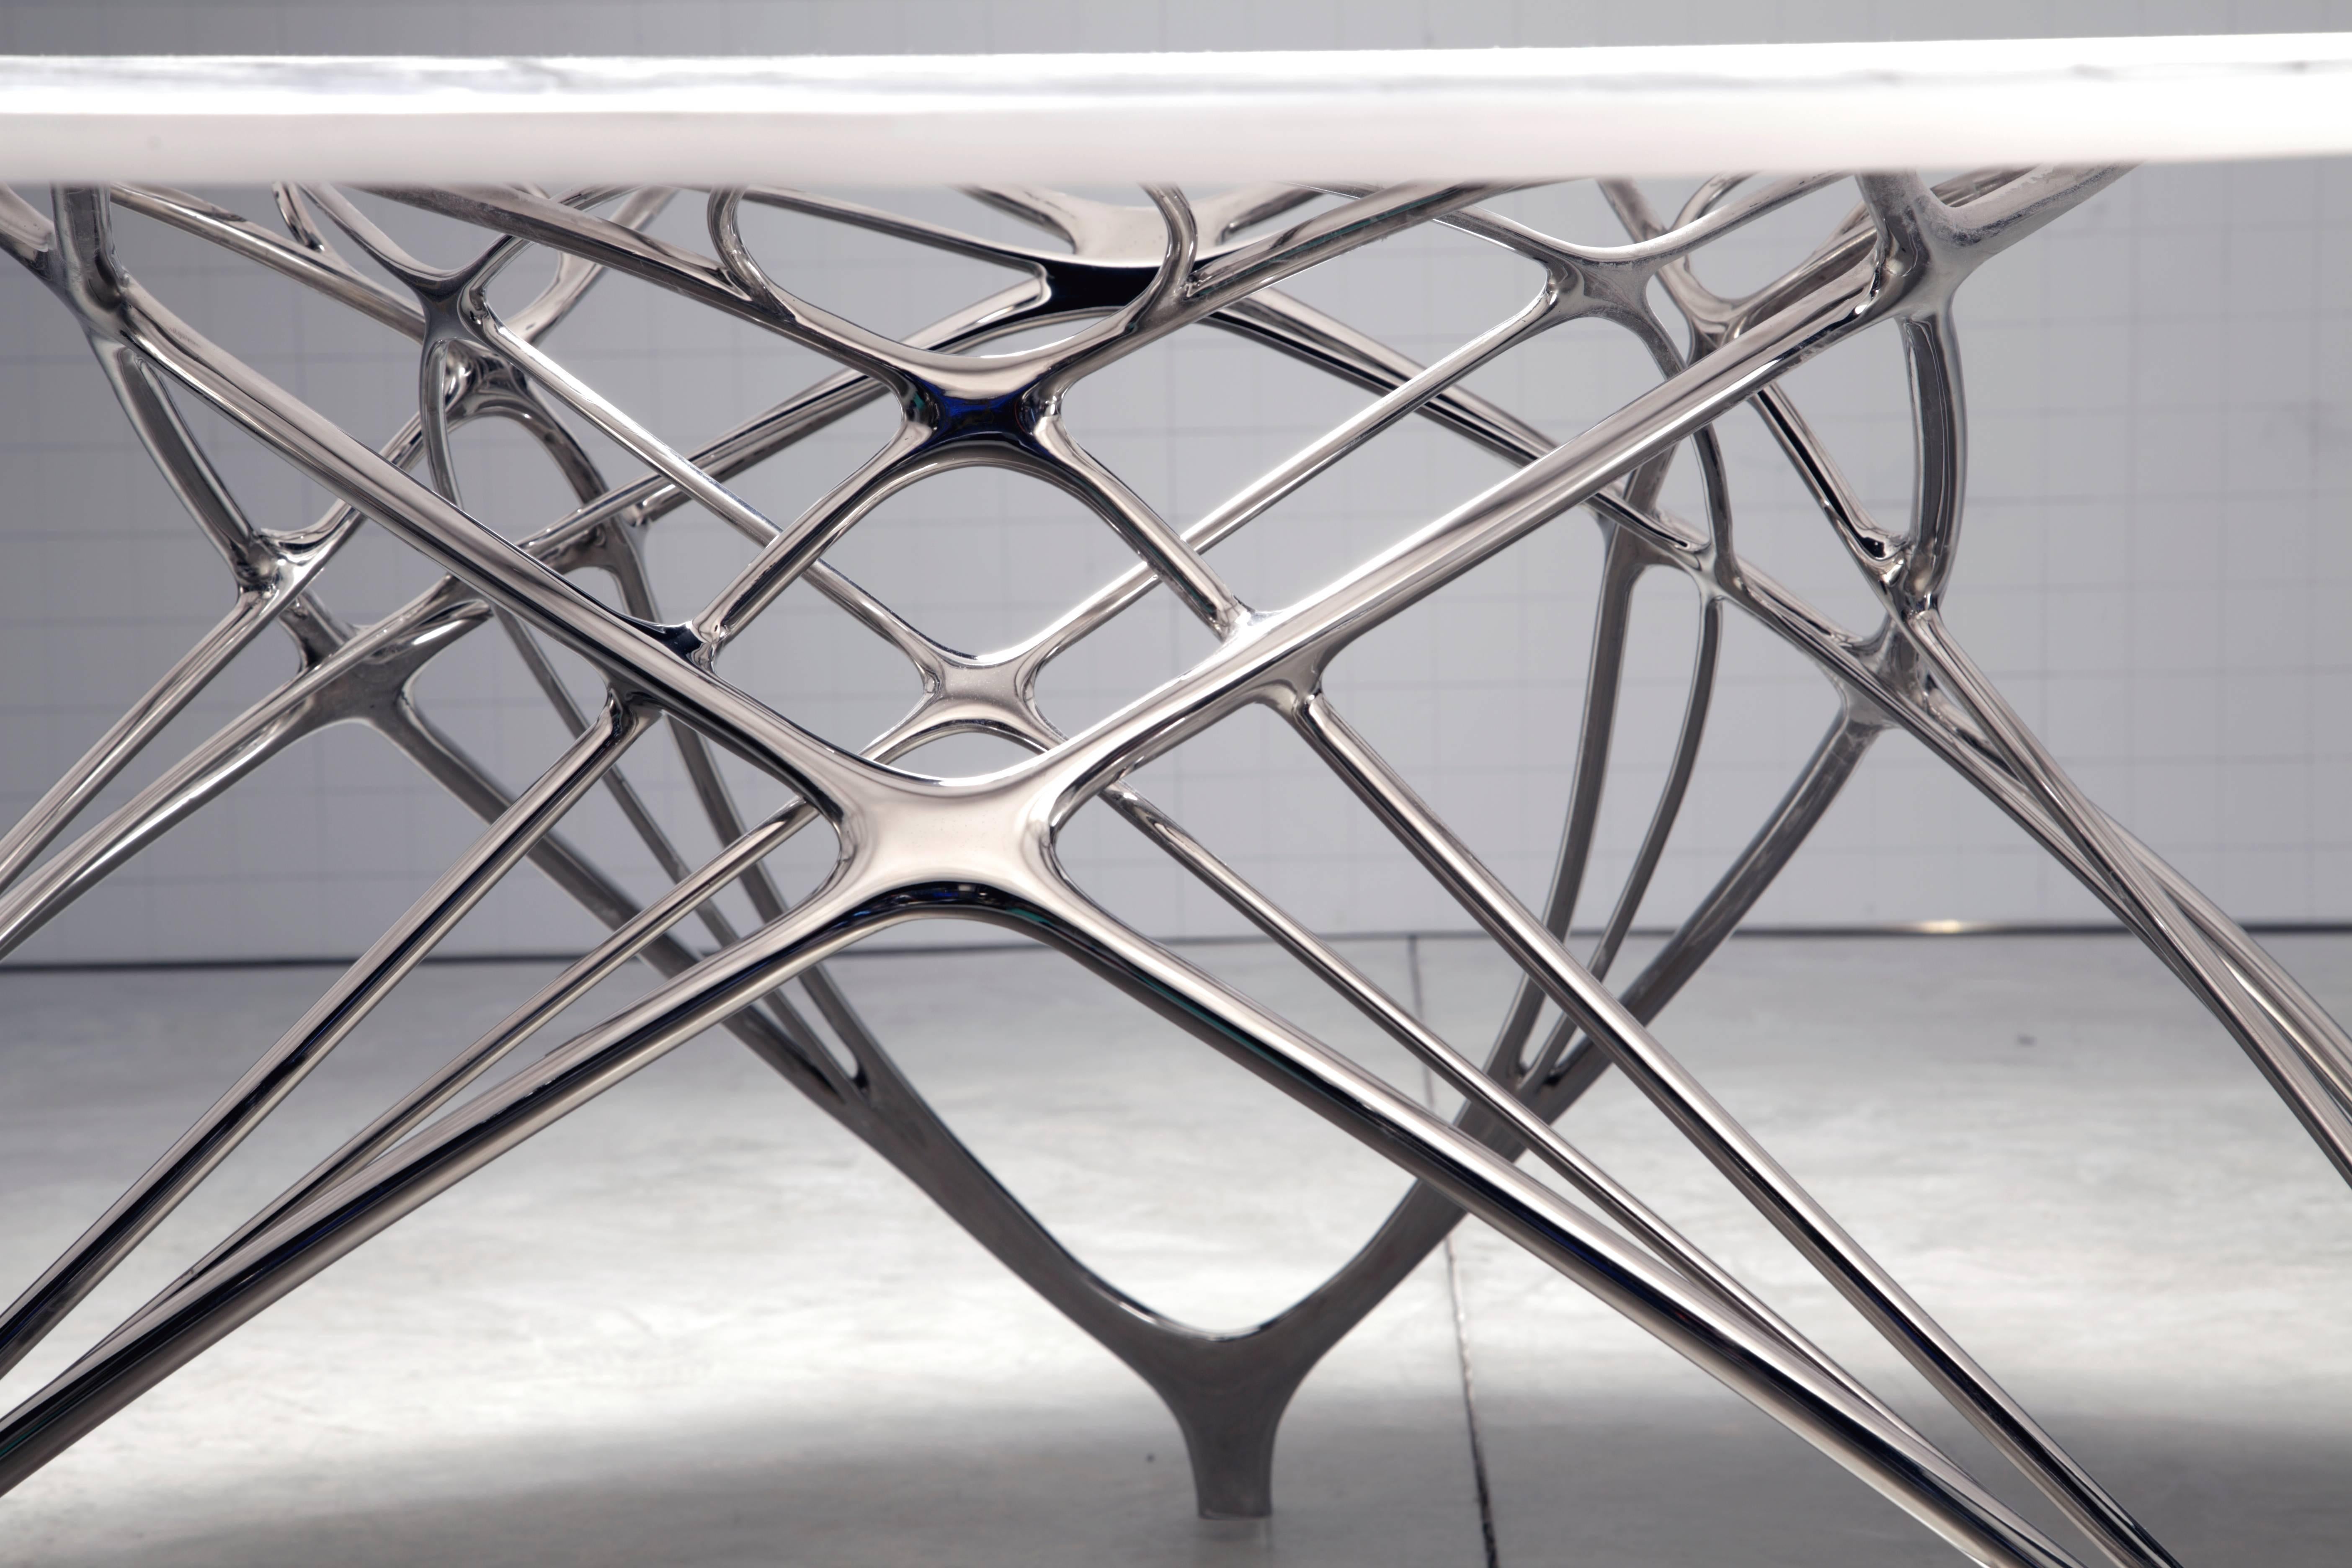 Joris Laarman [Dutch, b. 1979]
Leaf Table, 2010
Resin, steel and aluminum
29.92 x 79.92 x 79.92 inches
76 x 203 x 203 cm

Laarman was born in Borculo, Netherlands. He graduated Cum Laude from the Design Academy Eindhoven in 2003. Laarman first